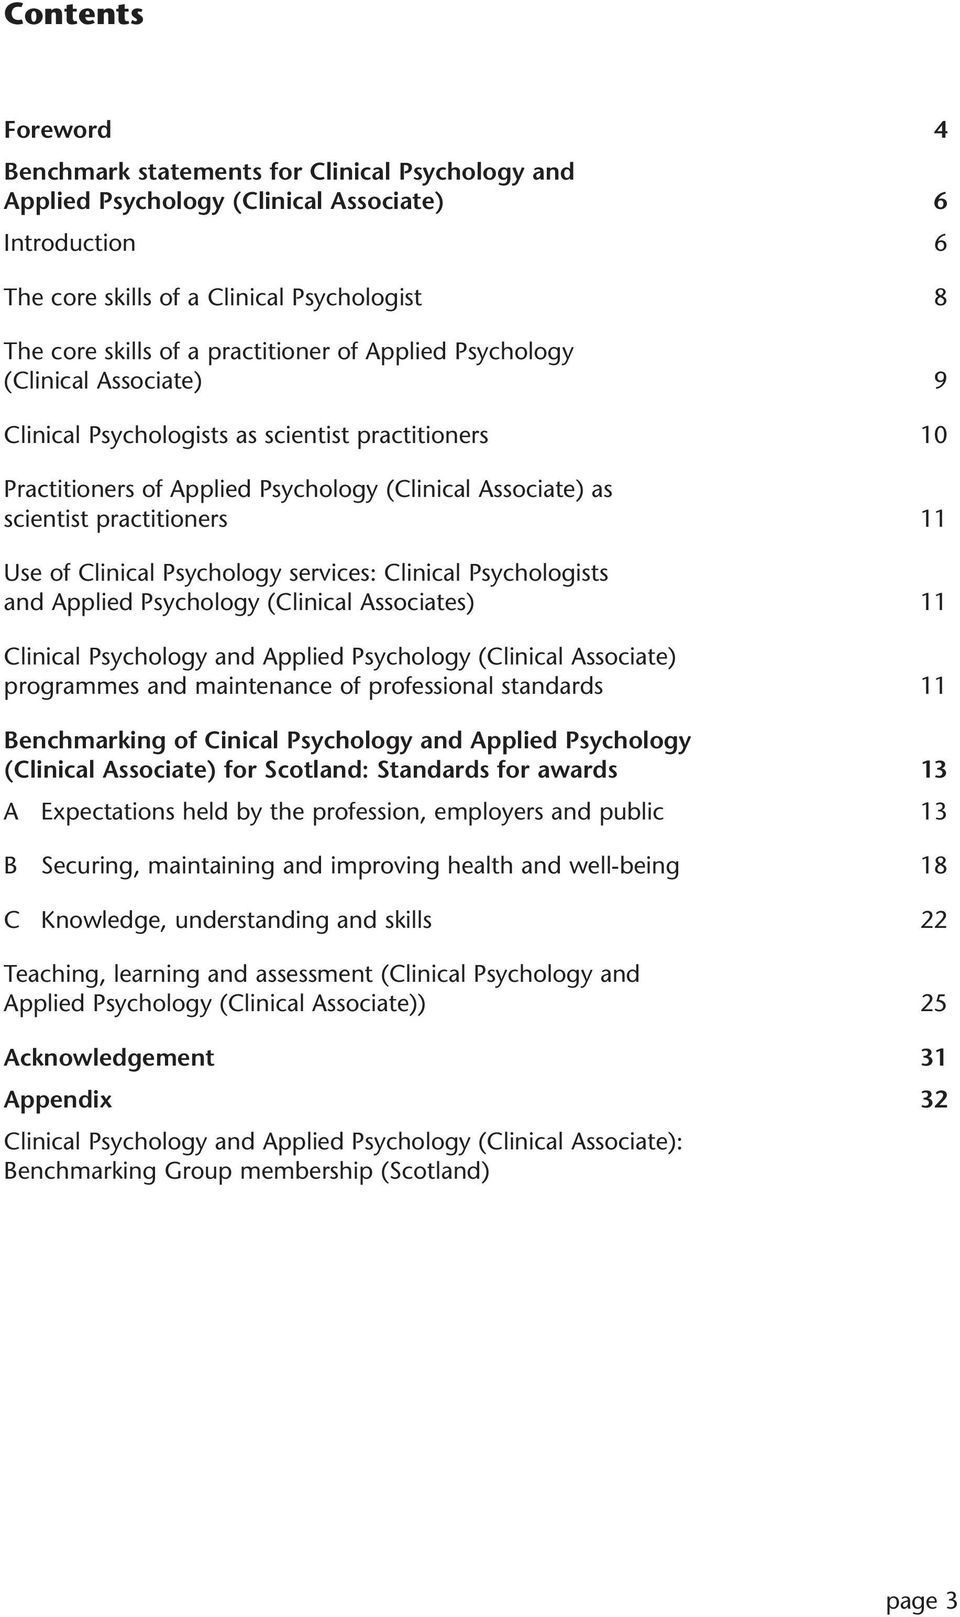 Use of Clinical Psychology services: Clinical Psychologists and Applied Psychology (Clinical Associates) 11 Clinical Psychology and Applied Psychology (Clinical Associate) programmes and maintenance